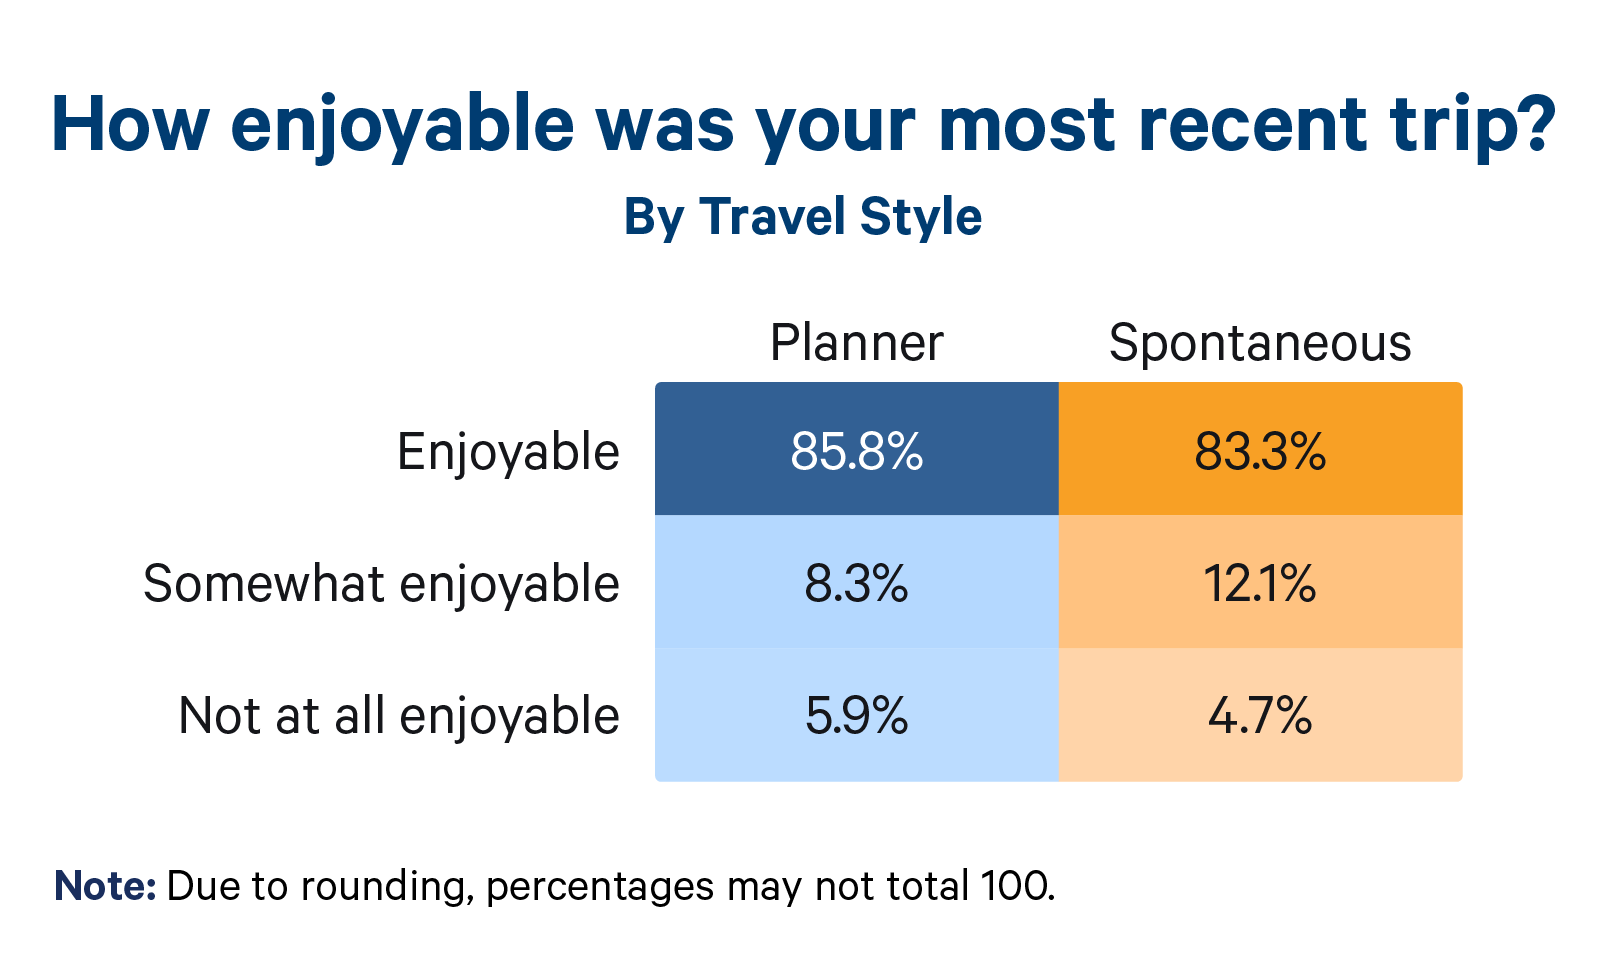 Infographic on enjoyment of most recent trip by travel style